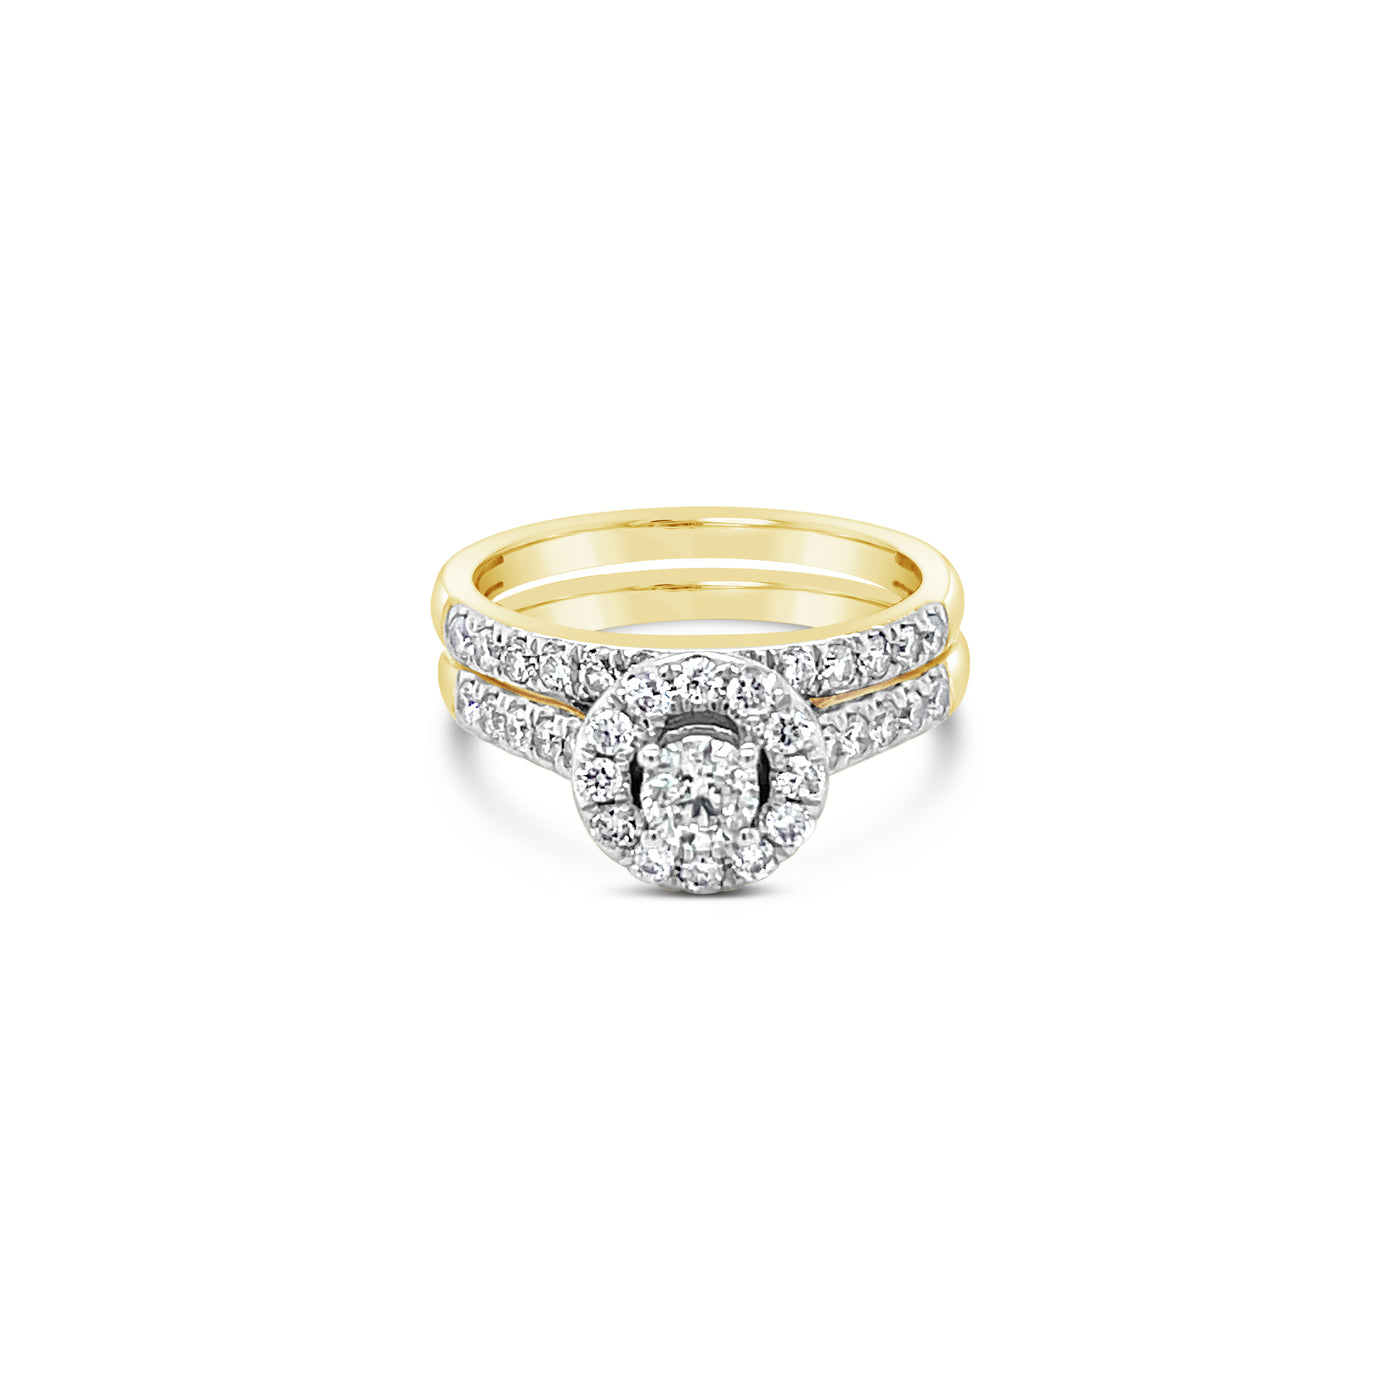 14Ct Yellow Gold Bridal Set. Engagement Ring With 1 X 0.26Ct Rbc Diamond, 12X0.012Ct Rbc Diamonds In Halo, 10X0.020Ct Rbc Diamonds In Shoulders, 28X0.004Ct Rbc Accent Diamonds (Tdw=0.736Ct). Wedder Set With 13X0.020Ct Rbc Diamonds (Tdw=0.26Ct) Gh Si3